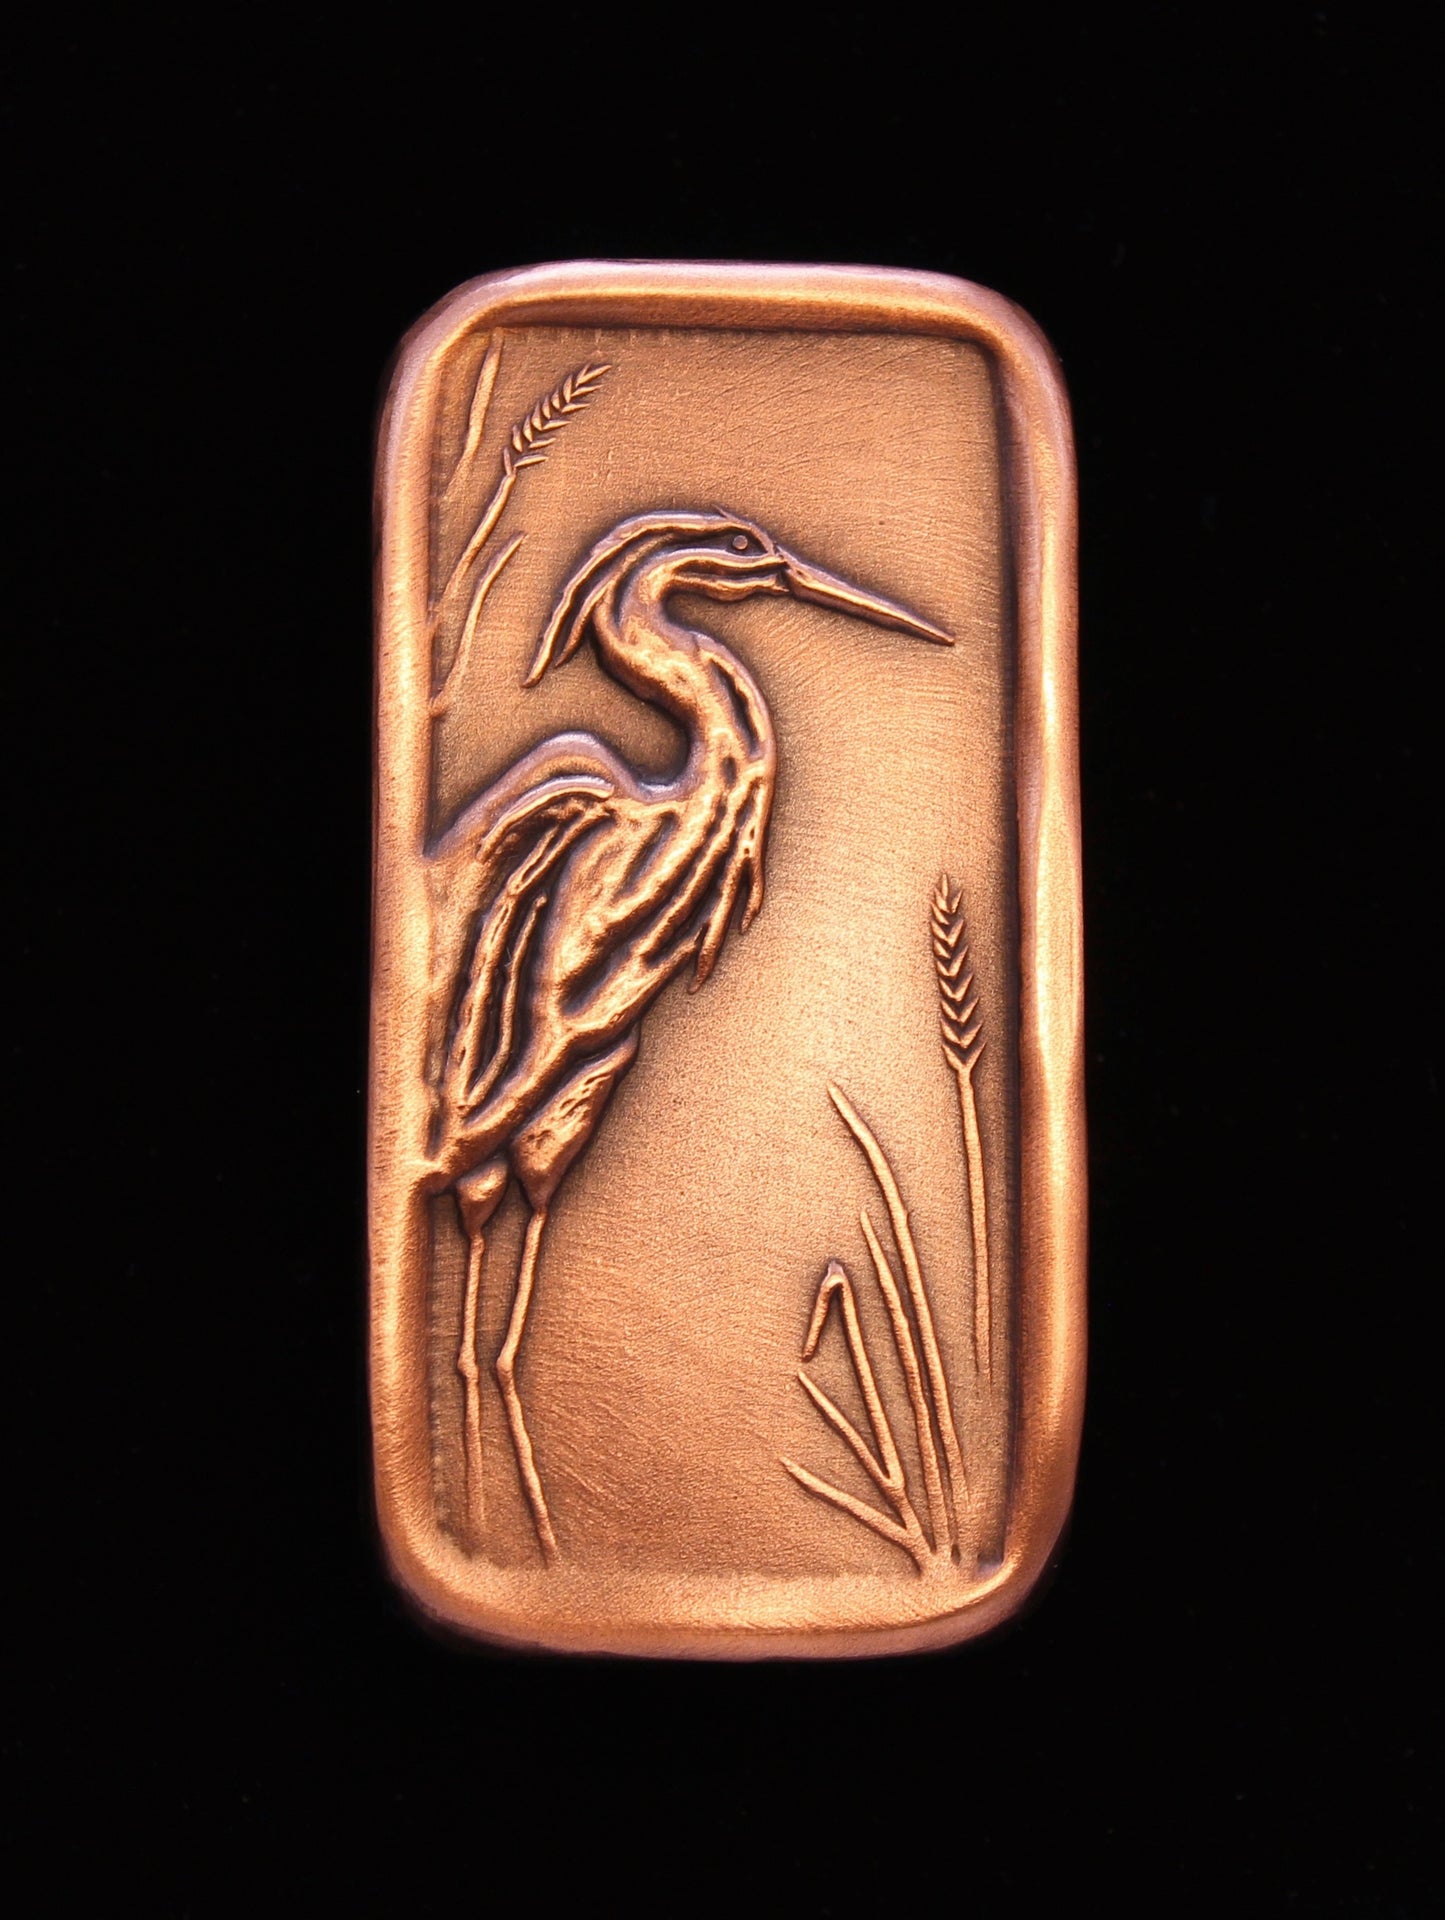 Blue Heron Cabinet Pull, Facing Right, 1.5" x 3"